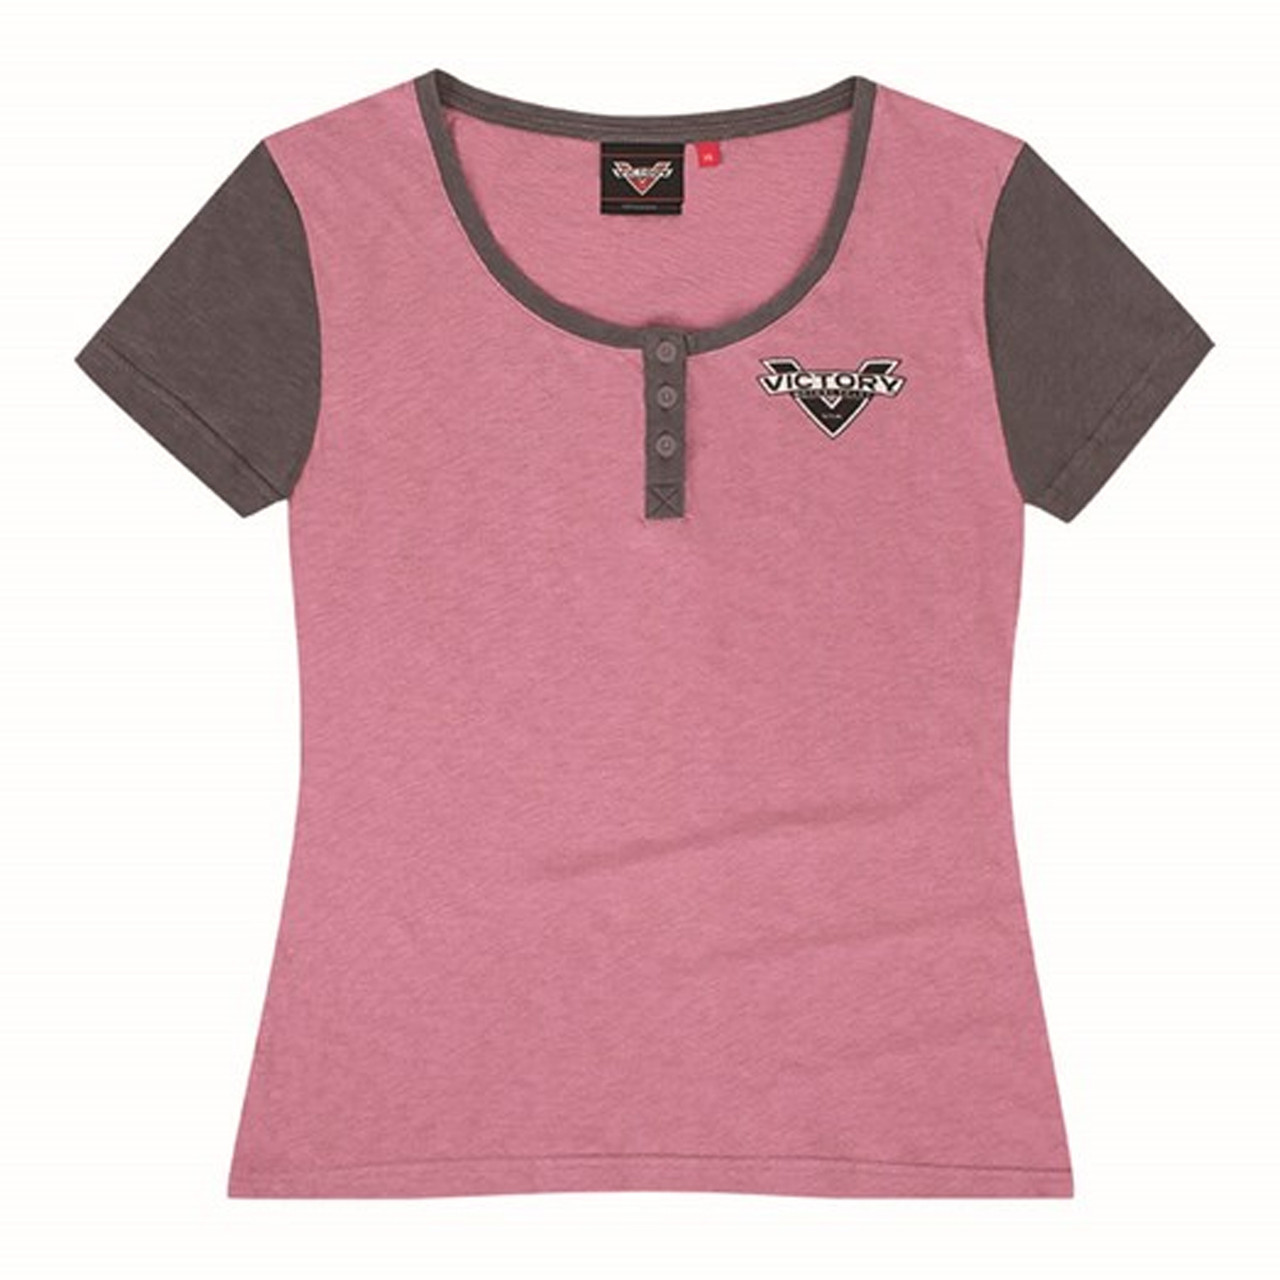 Victory Motorcycle New OEM Women's Pink Henley Tee Shirt, X-Small, 286799001